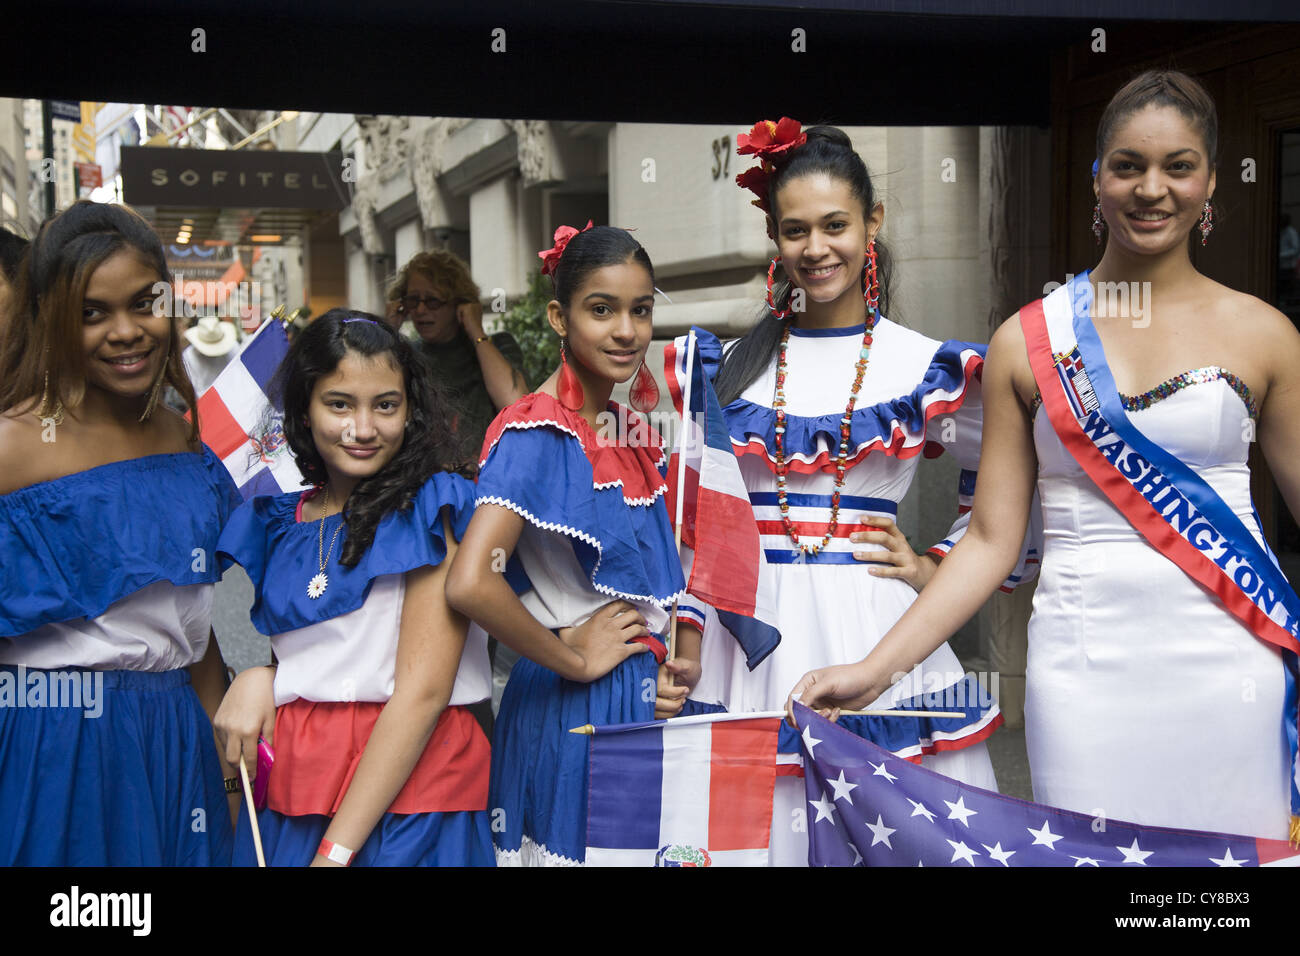 Hispanic Day Parade, New York City. Young women represent  the Dominican Republic displaying their pride as Dominican Americans. Stock Photo